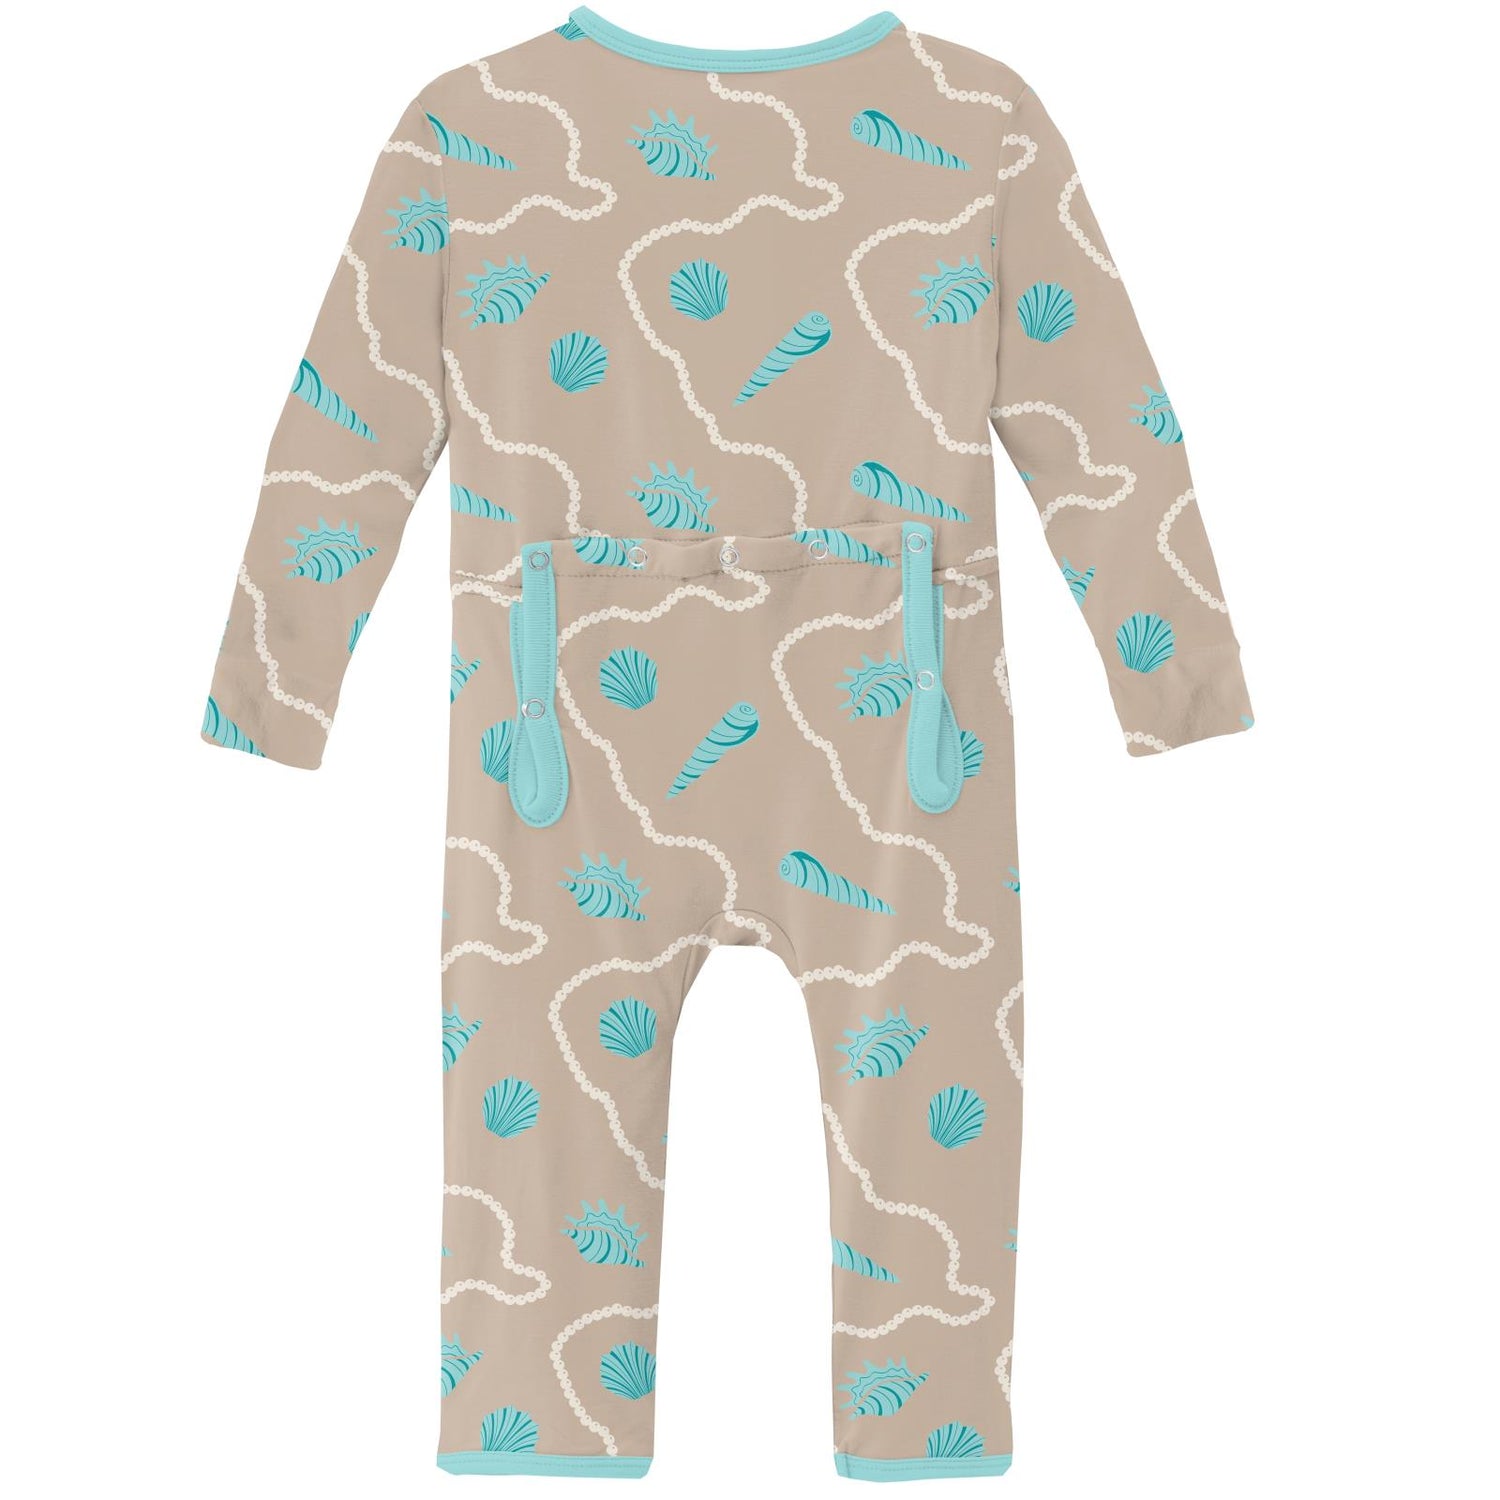 Print Coverall with Zipper in Burlap Shells